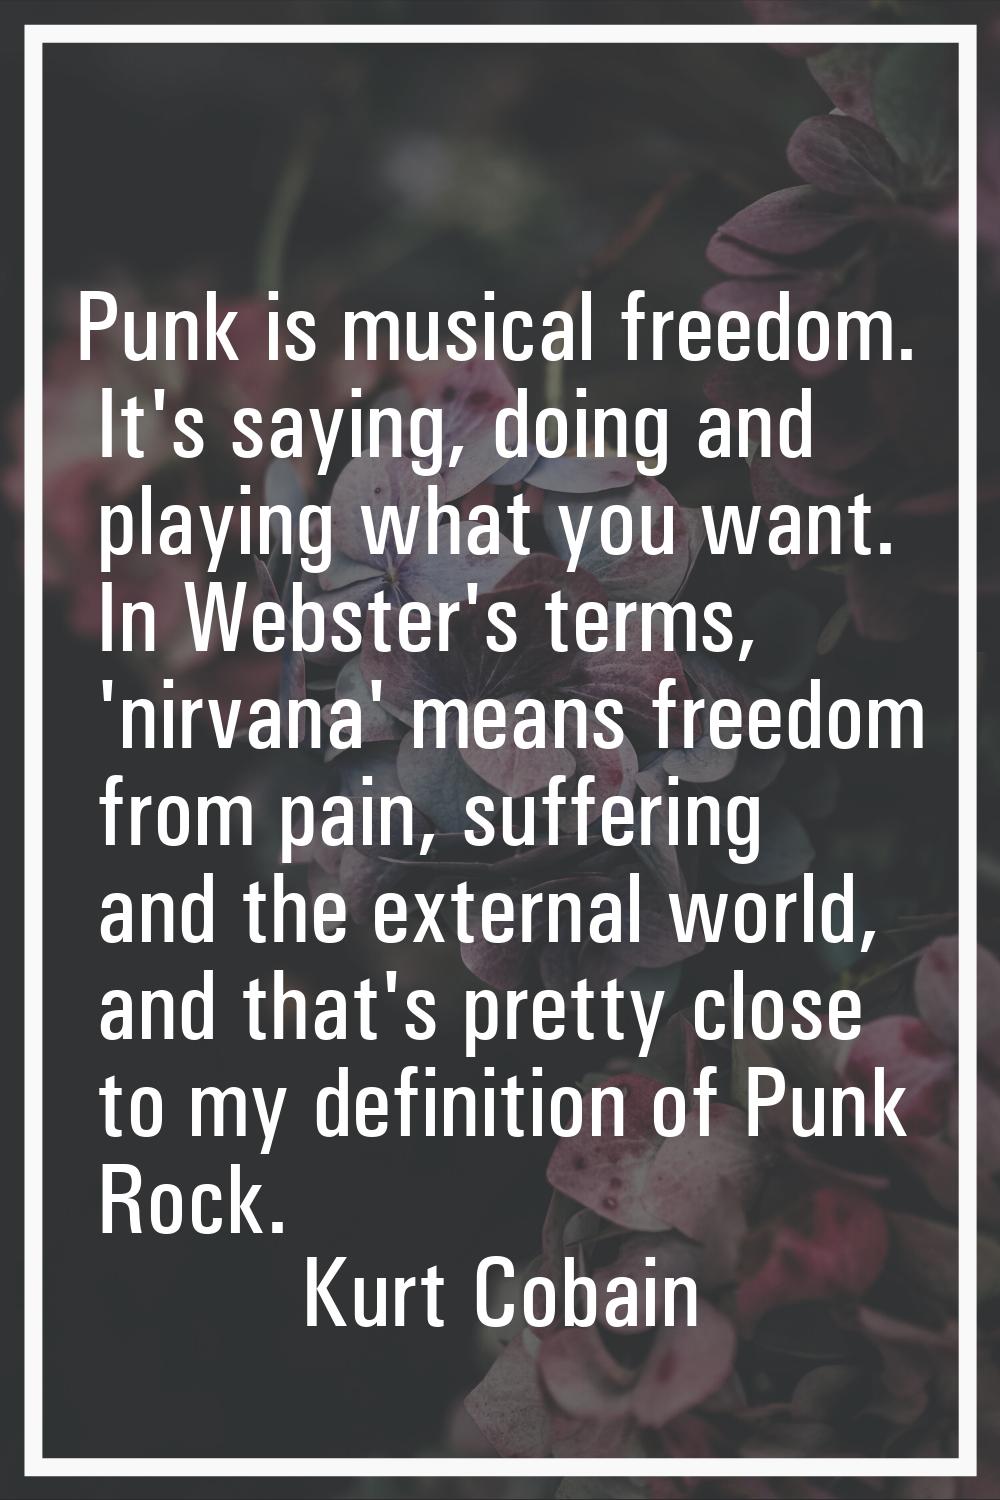 Punk is musical freedom. It's saying, doing and playing what you want. In Webster's terms, 'nirvana